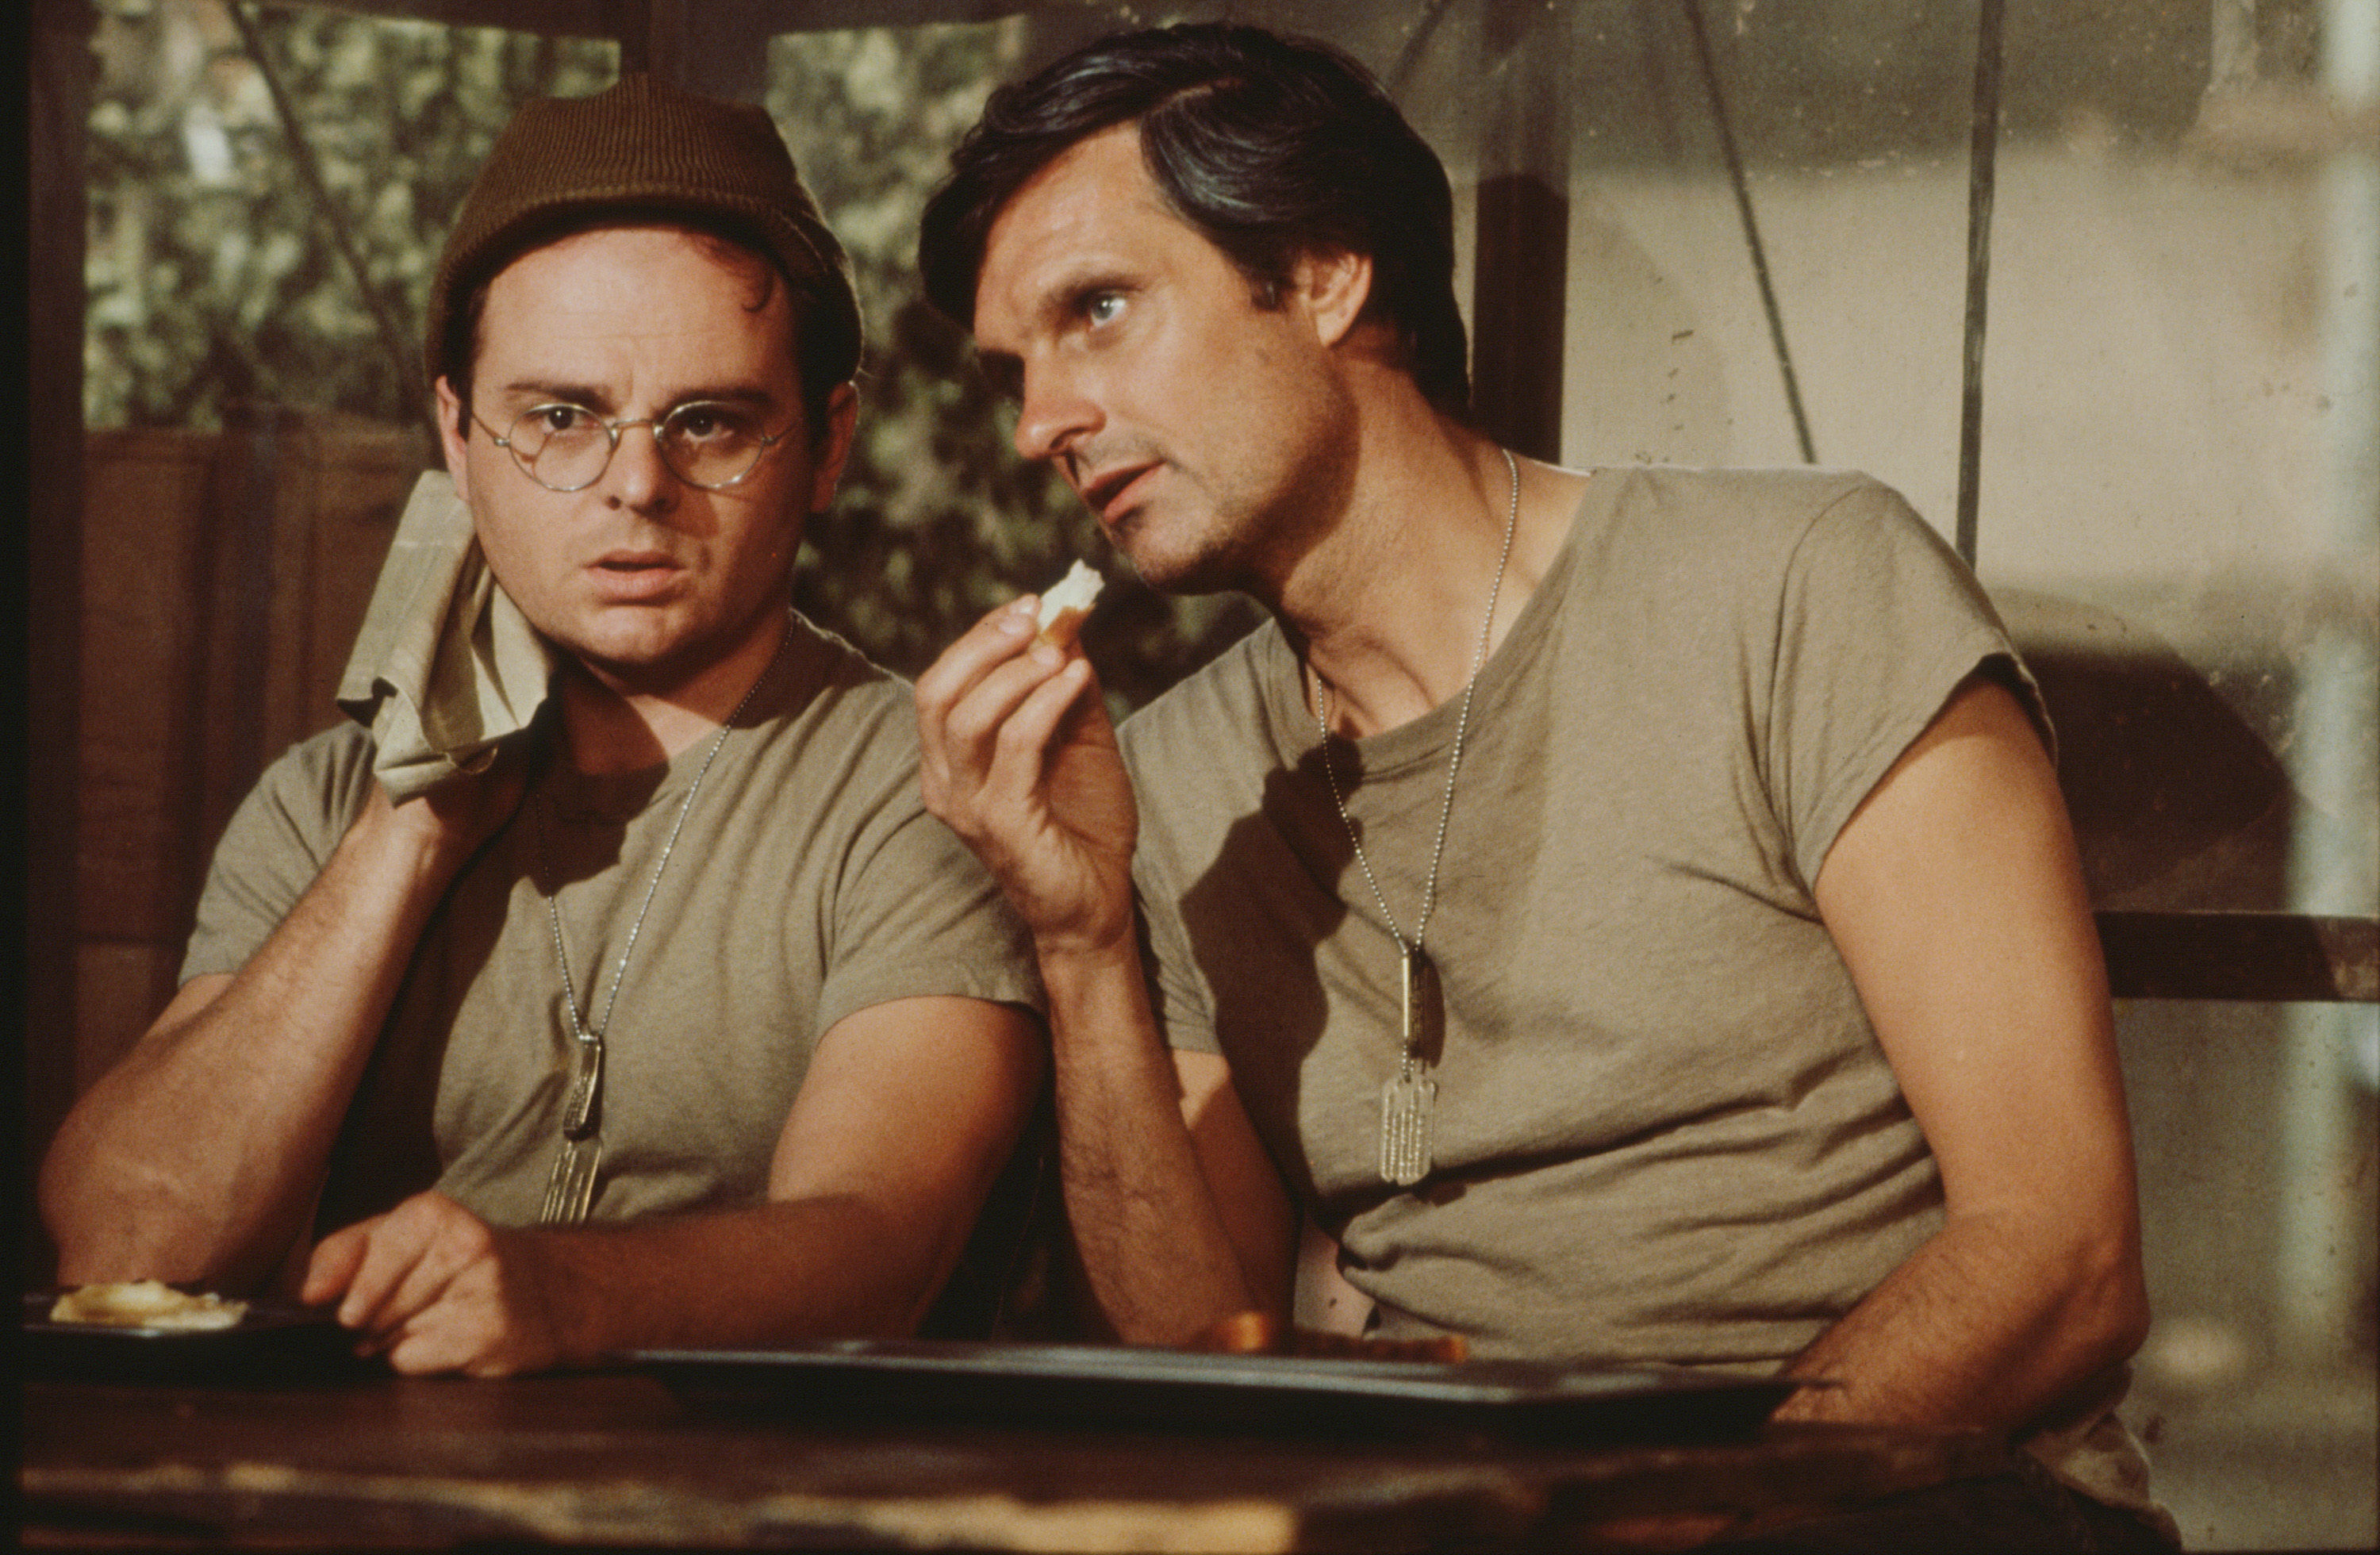 Gary Burghoff as Corporal Walter "Radar" O'Reilly and Alan Alda as Captain Benjamin "Hawkeye" Pierce, in a scene from the series "M*A*S*H," in California, circa 1976 | Source: Getty Images